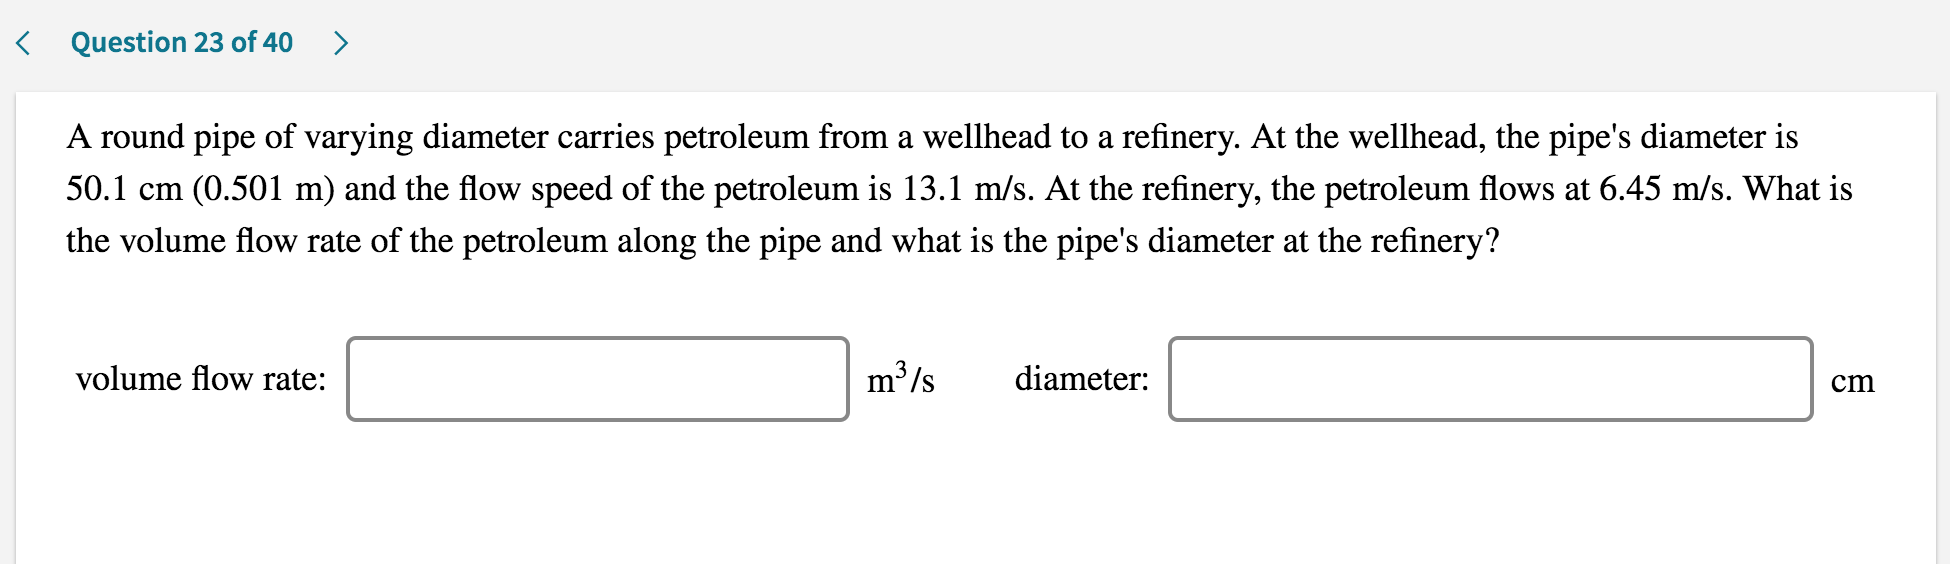 A round pipe of varying diameter carries petroleum from a wellhead to a refinery. At the wellhead, the pipe's diameter is
50.1 cm (0.501 m) and the flow speed of the petroleum is 13.1 m/s. At the refinery, the petroleum flows at 6.45 m/s. What is
the volume flow rate of the petroleum along the pipe and what is the pipe's diameter at the refinery?
volume flow rate:
m³/s
diameter:
cm
